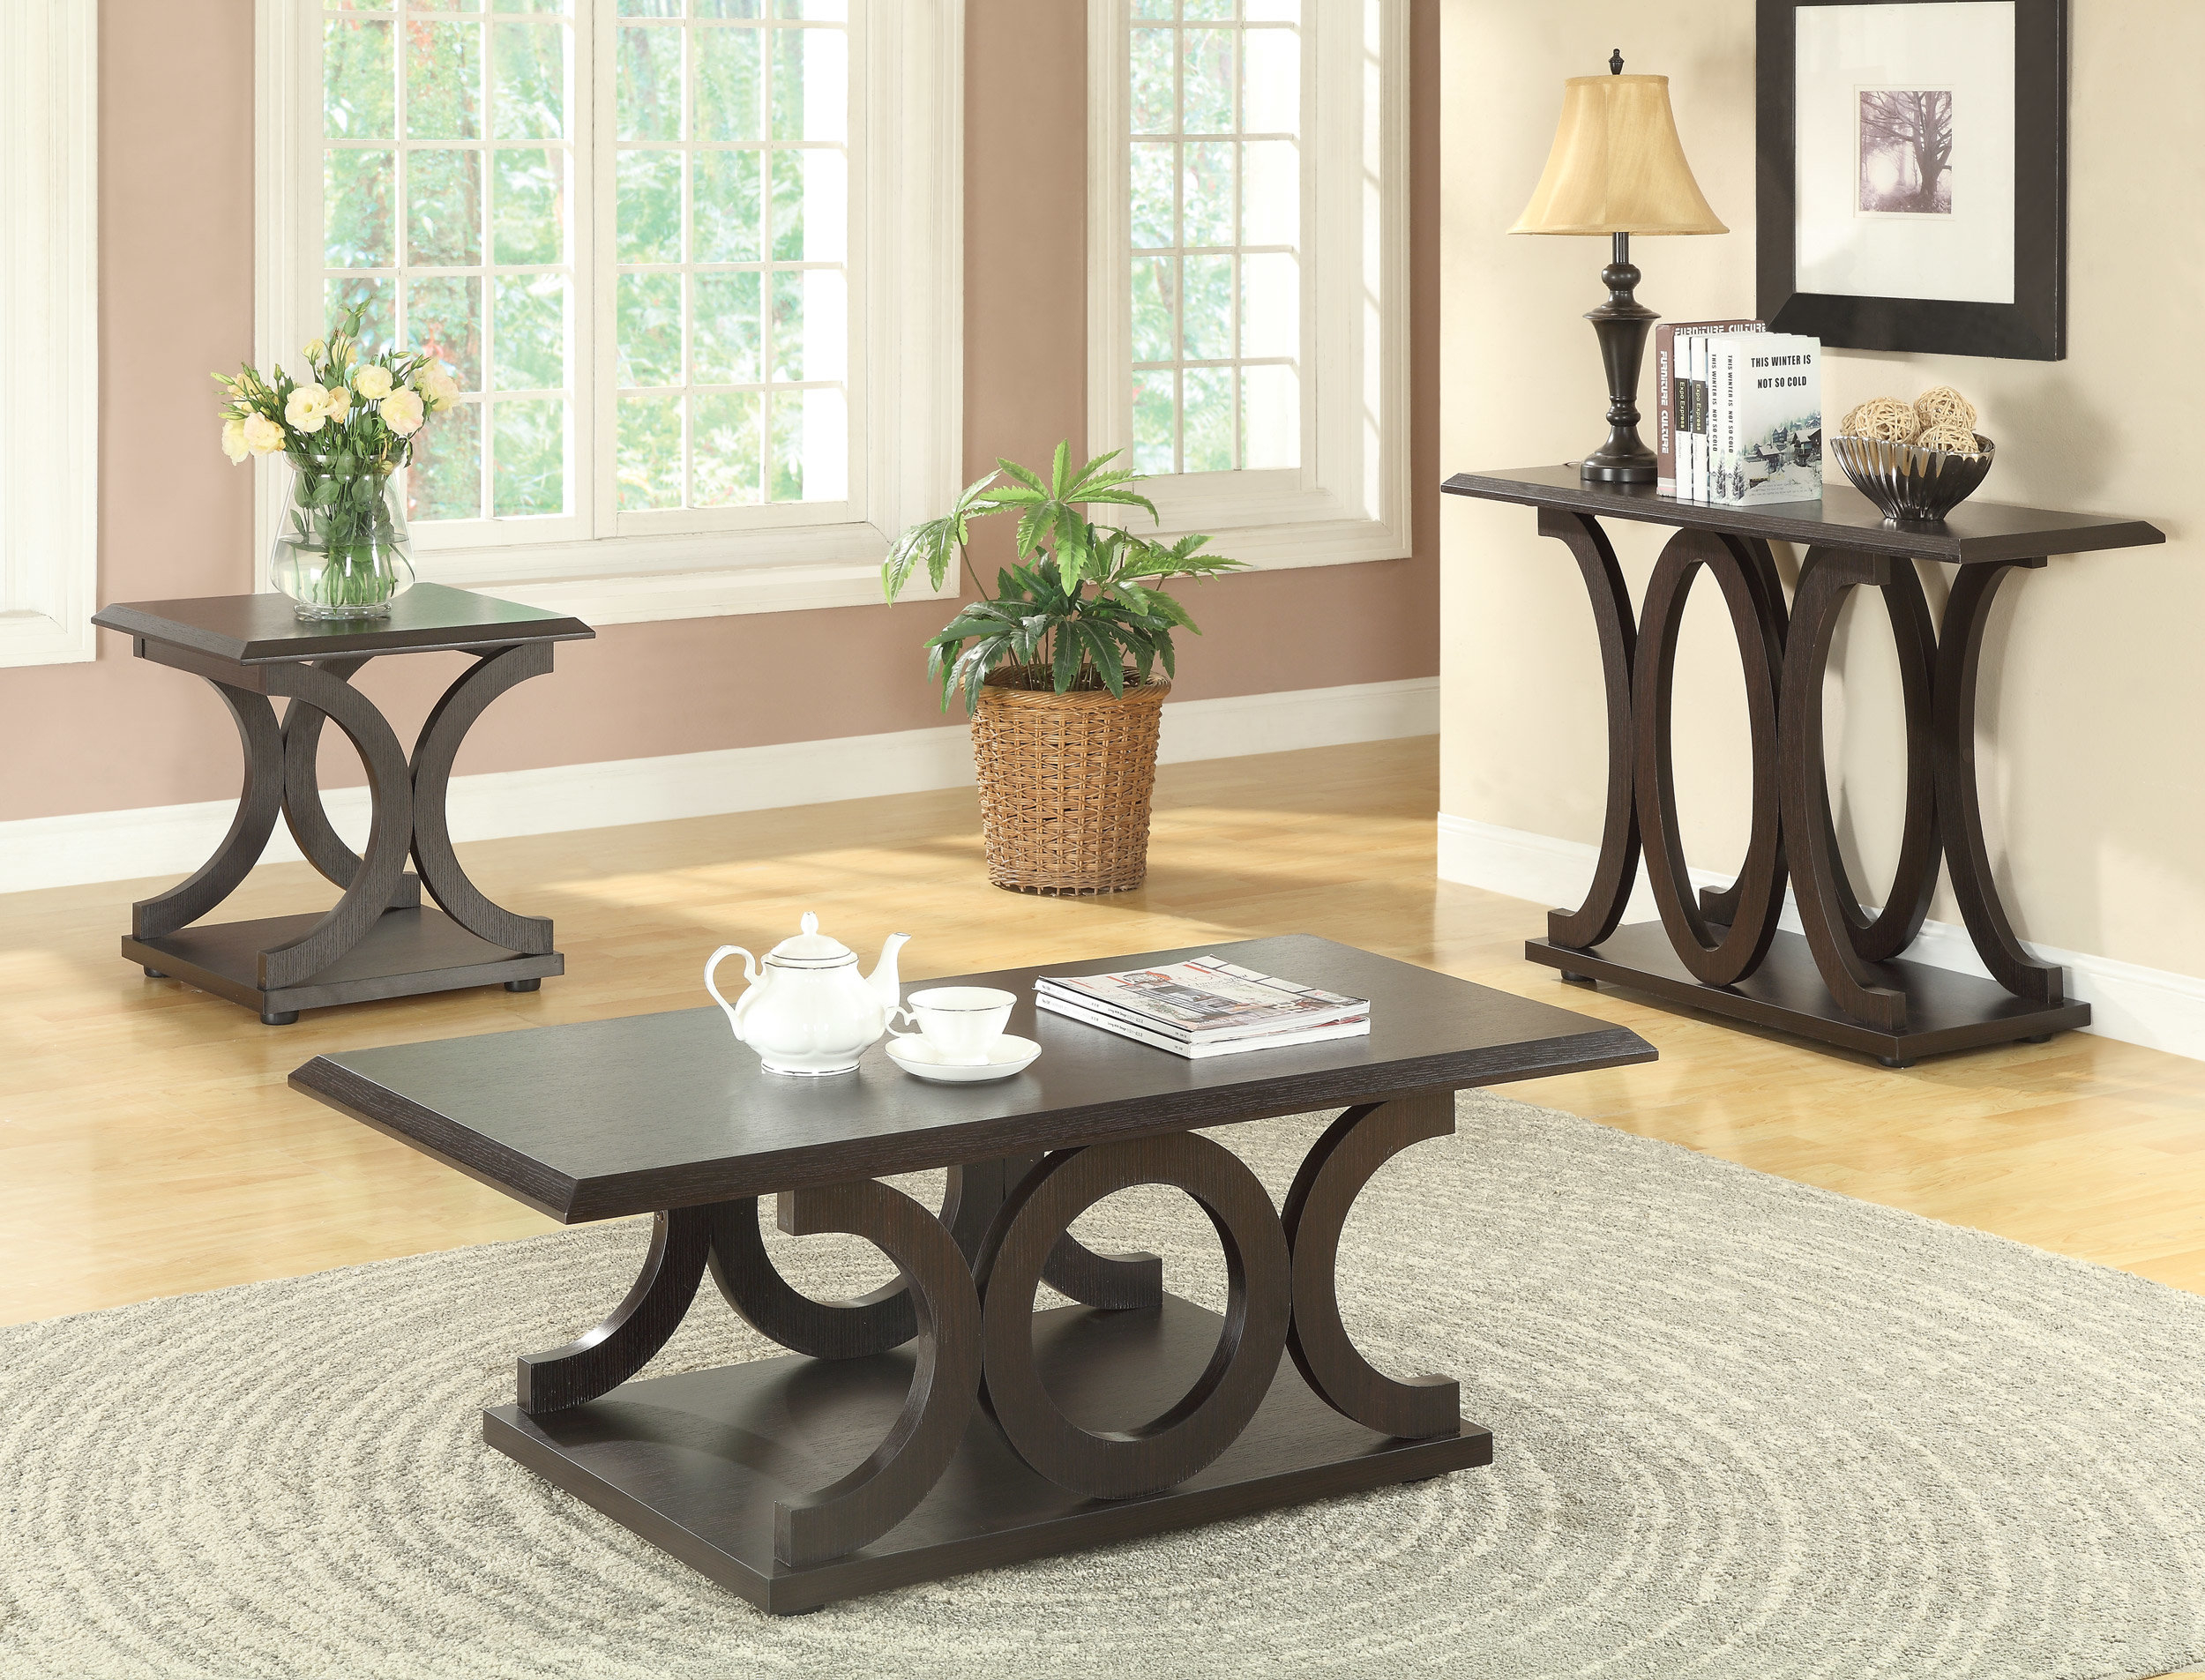 Red Barrel Studio Adaline 3 Piece Coffee Table Set Reviews Wayfair intended for size 2500 X 1905